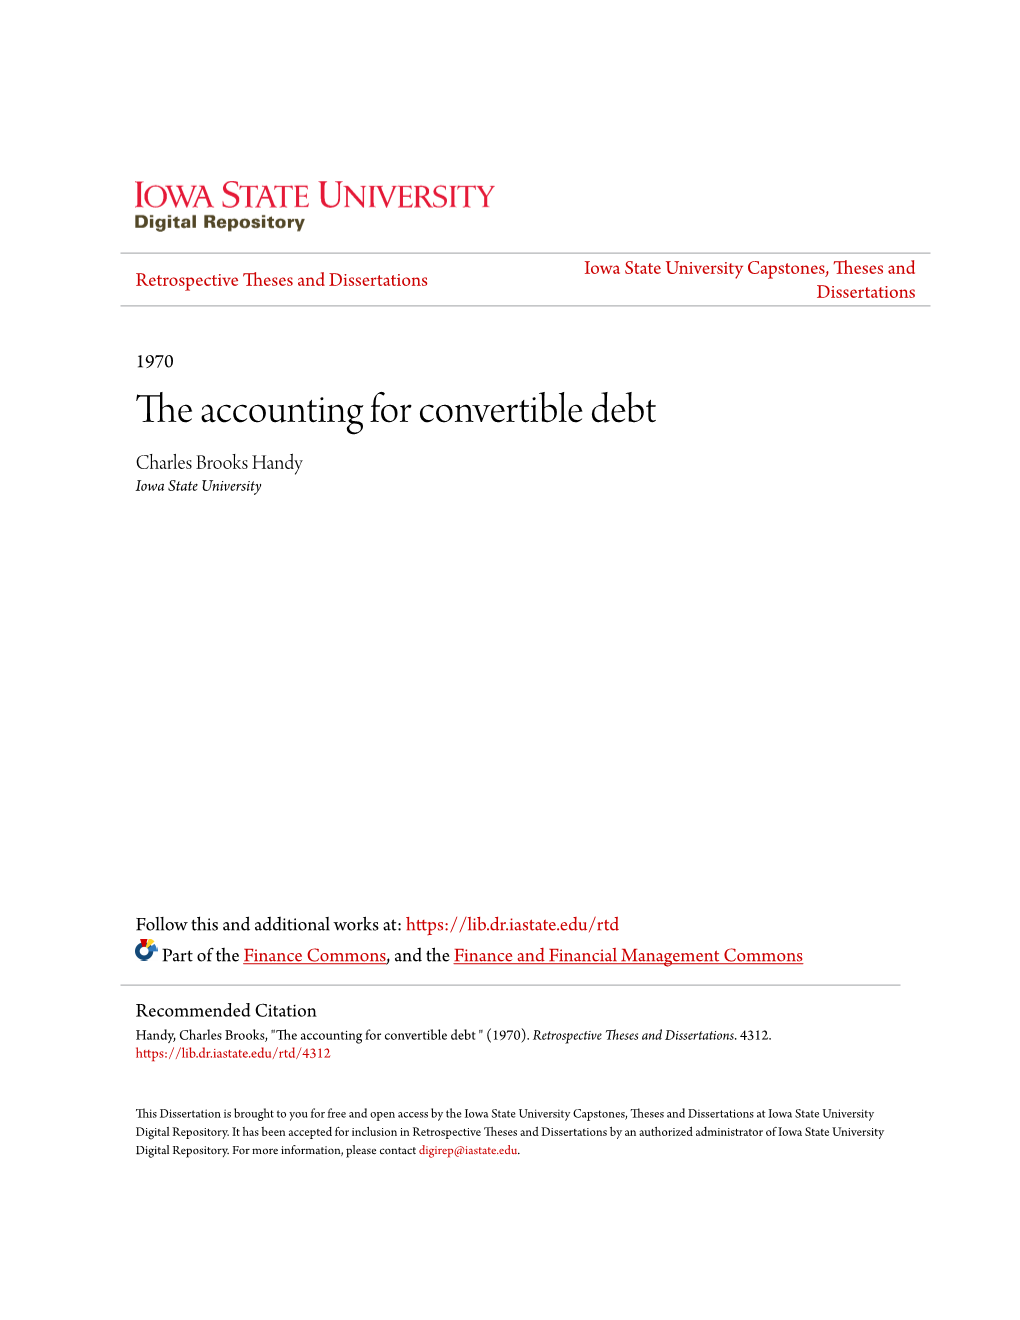 The Accounting for Convertible Debt